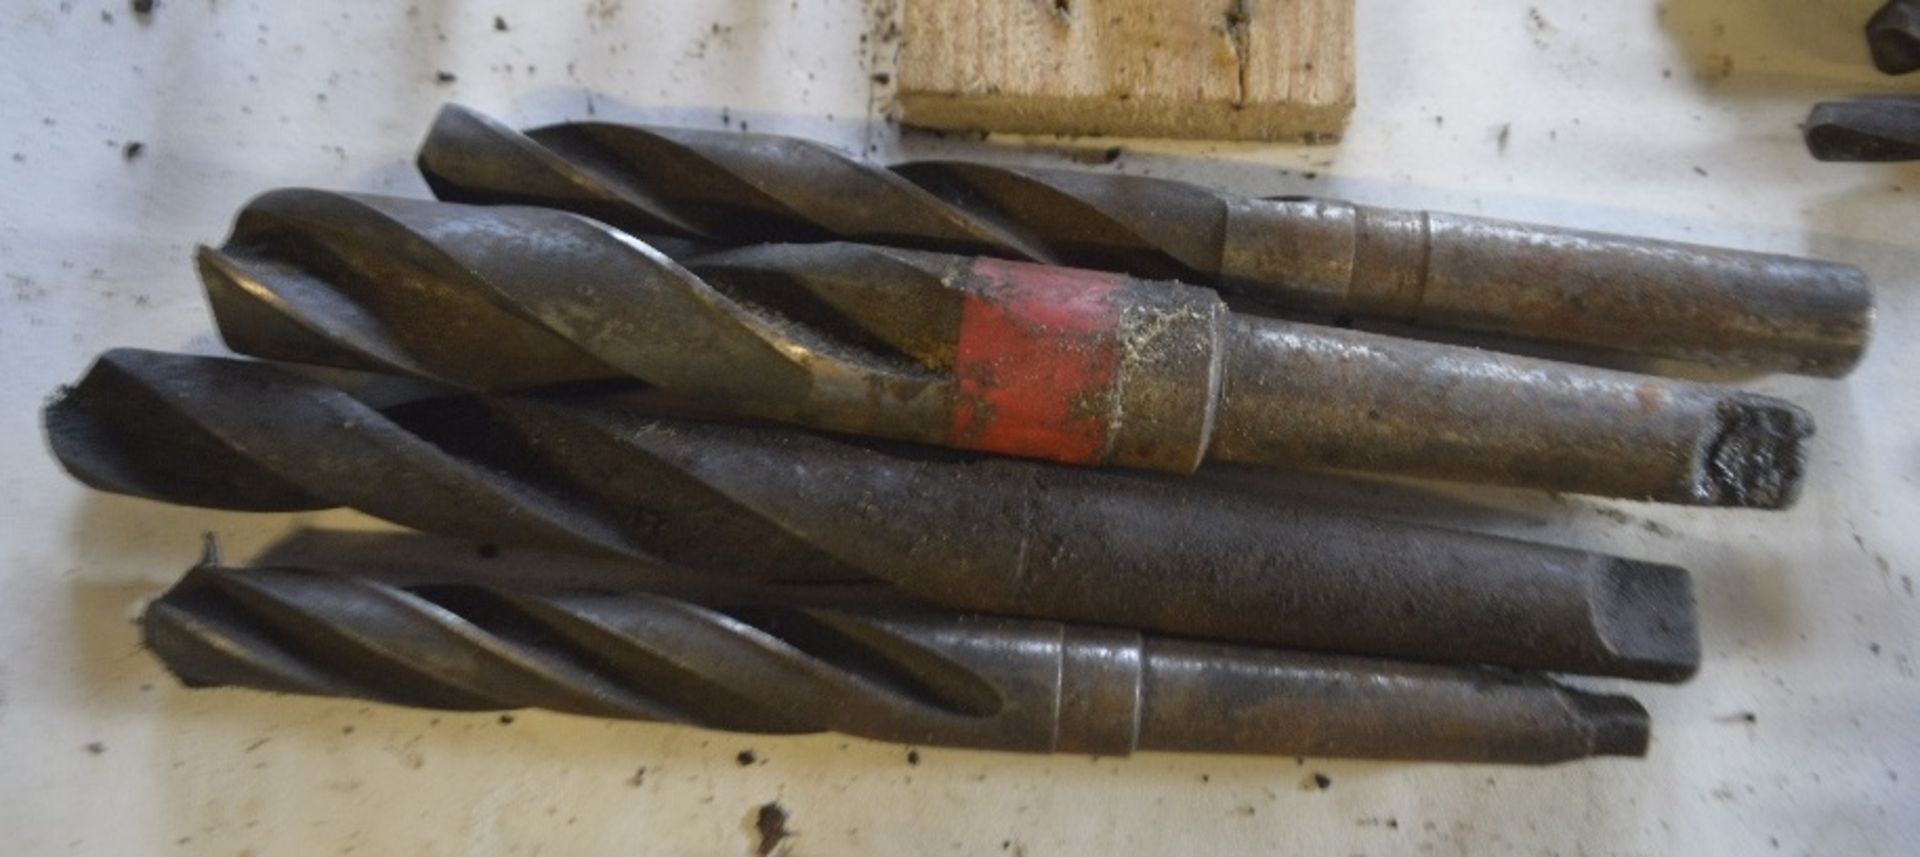 Four drill bits, length of longest approx. 10 1/2" (4).